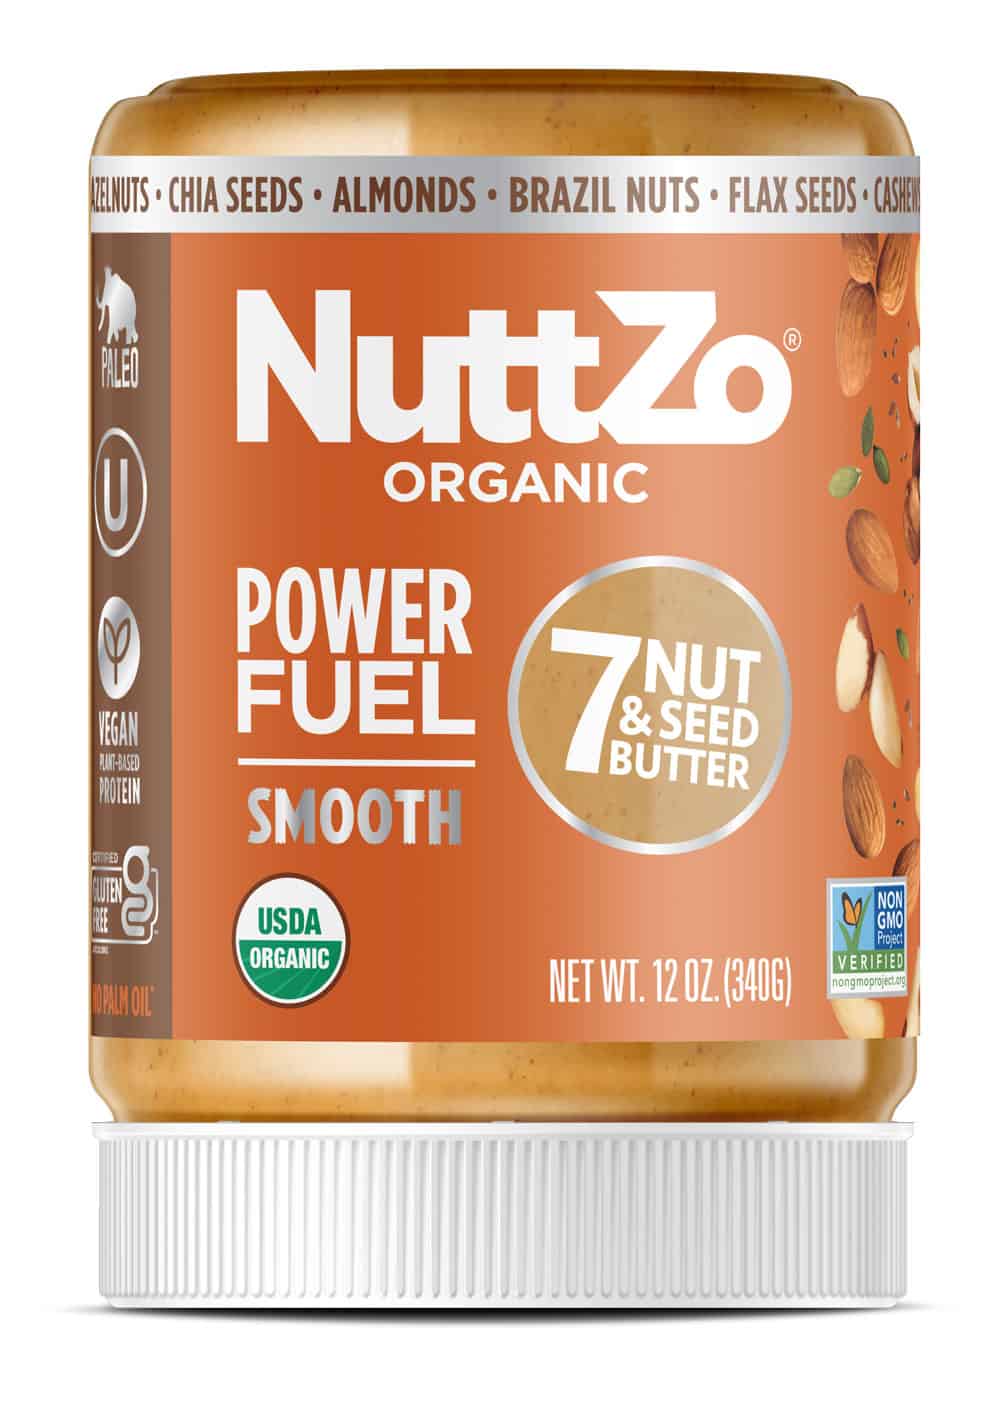 Nuttzo Organic Power Fuel,  Mixed Nut & Seed Butter - Smooth  6 units per case 12.0 oz